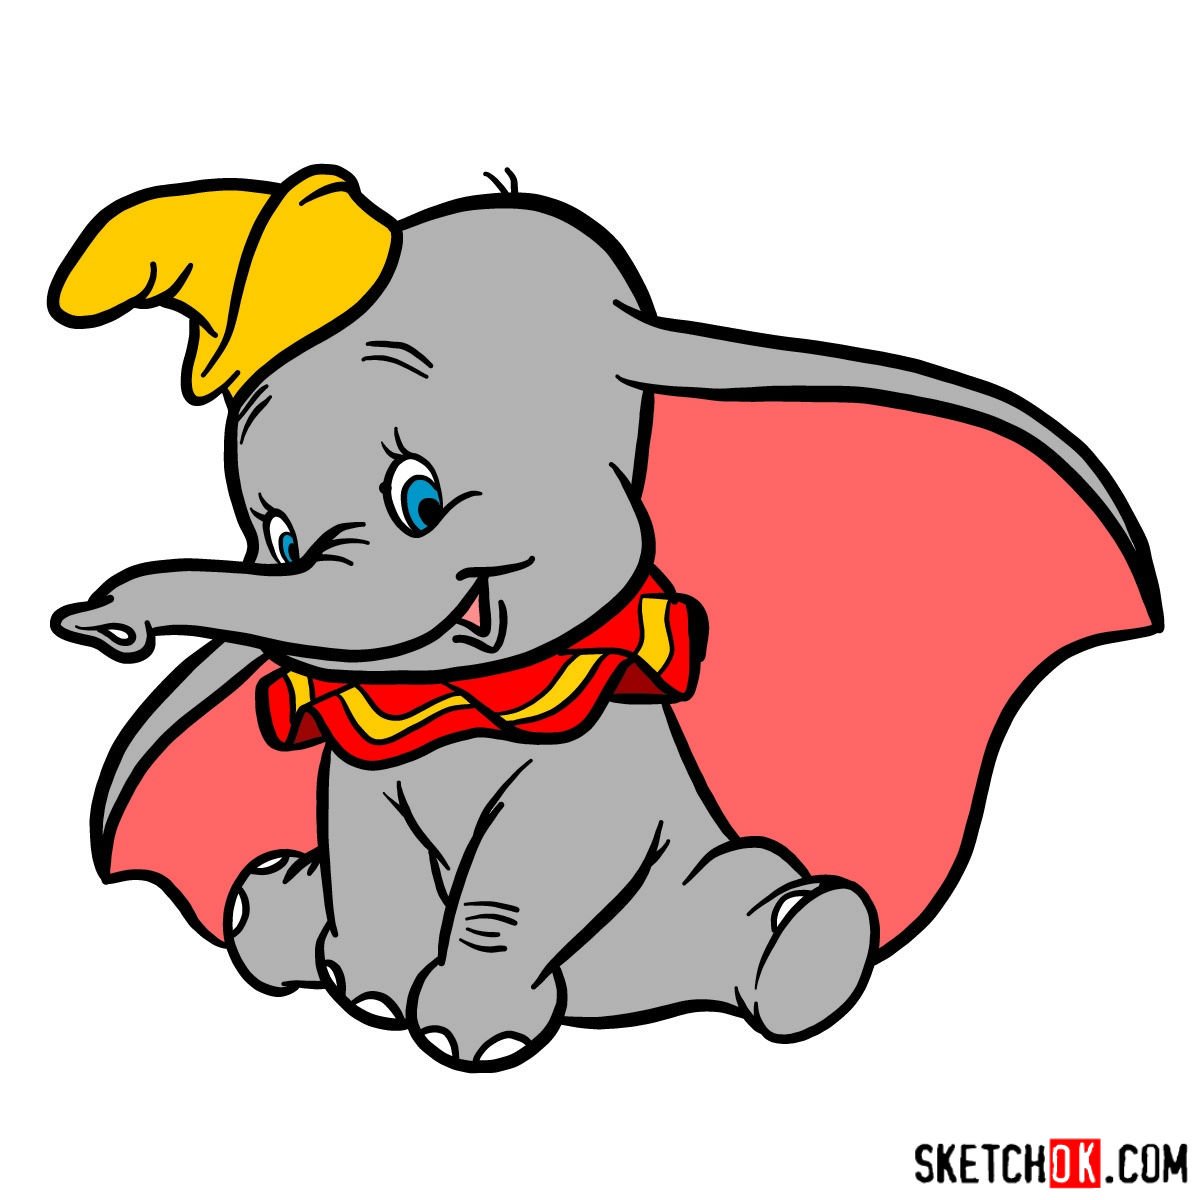 How to draw Dumbo the elephant